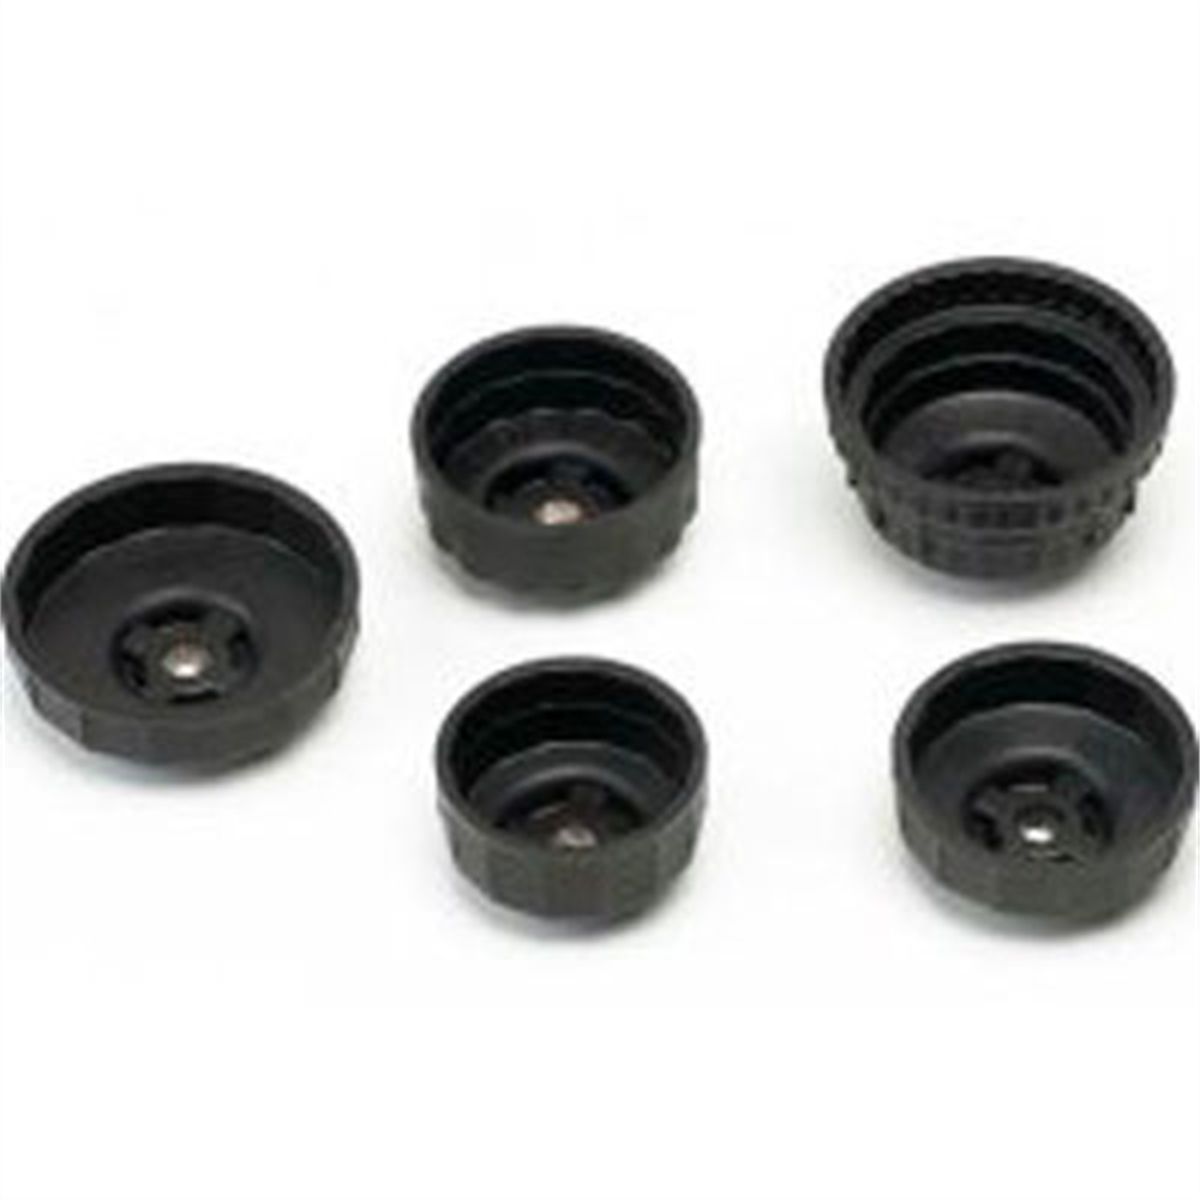 Oil Filter Cap Wrench 76 mm 14 Flute Plastic Cup